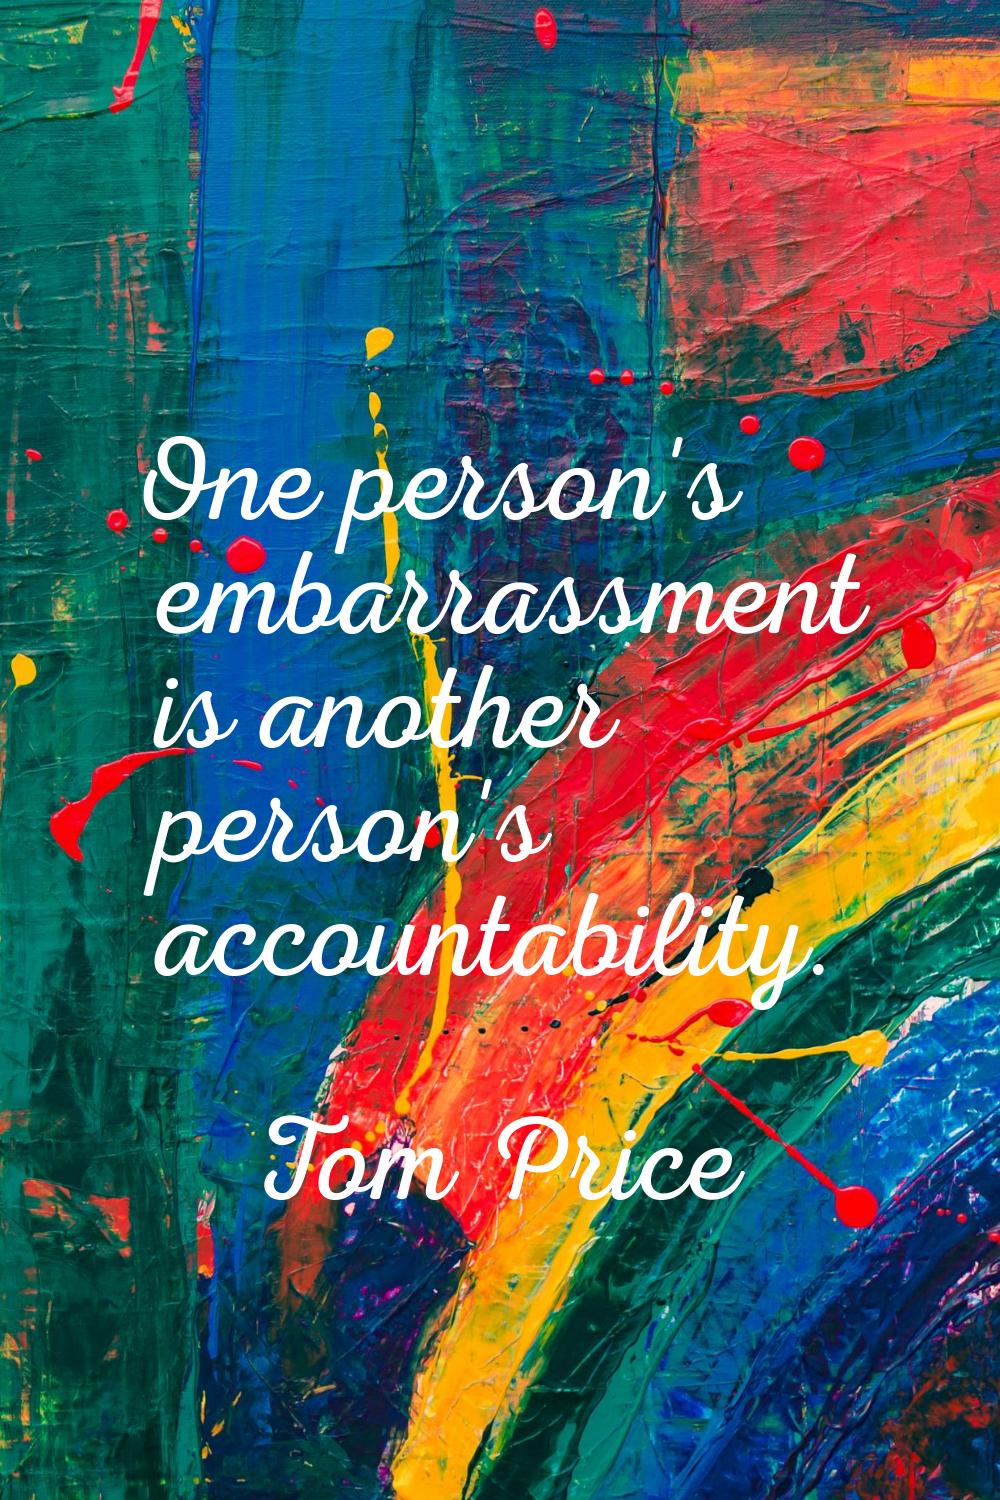 One person's embarrassment is another person's accountability.